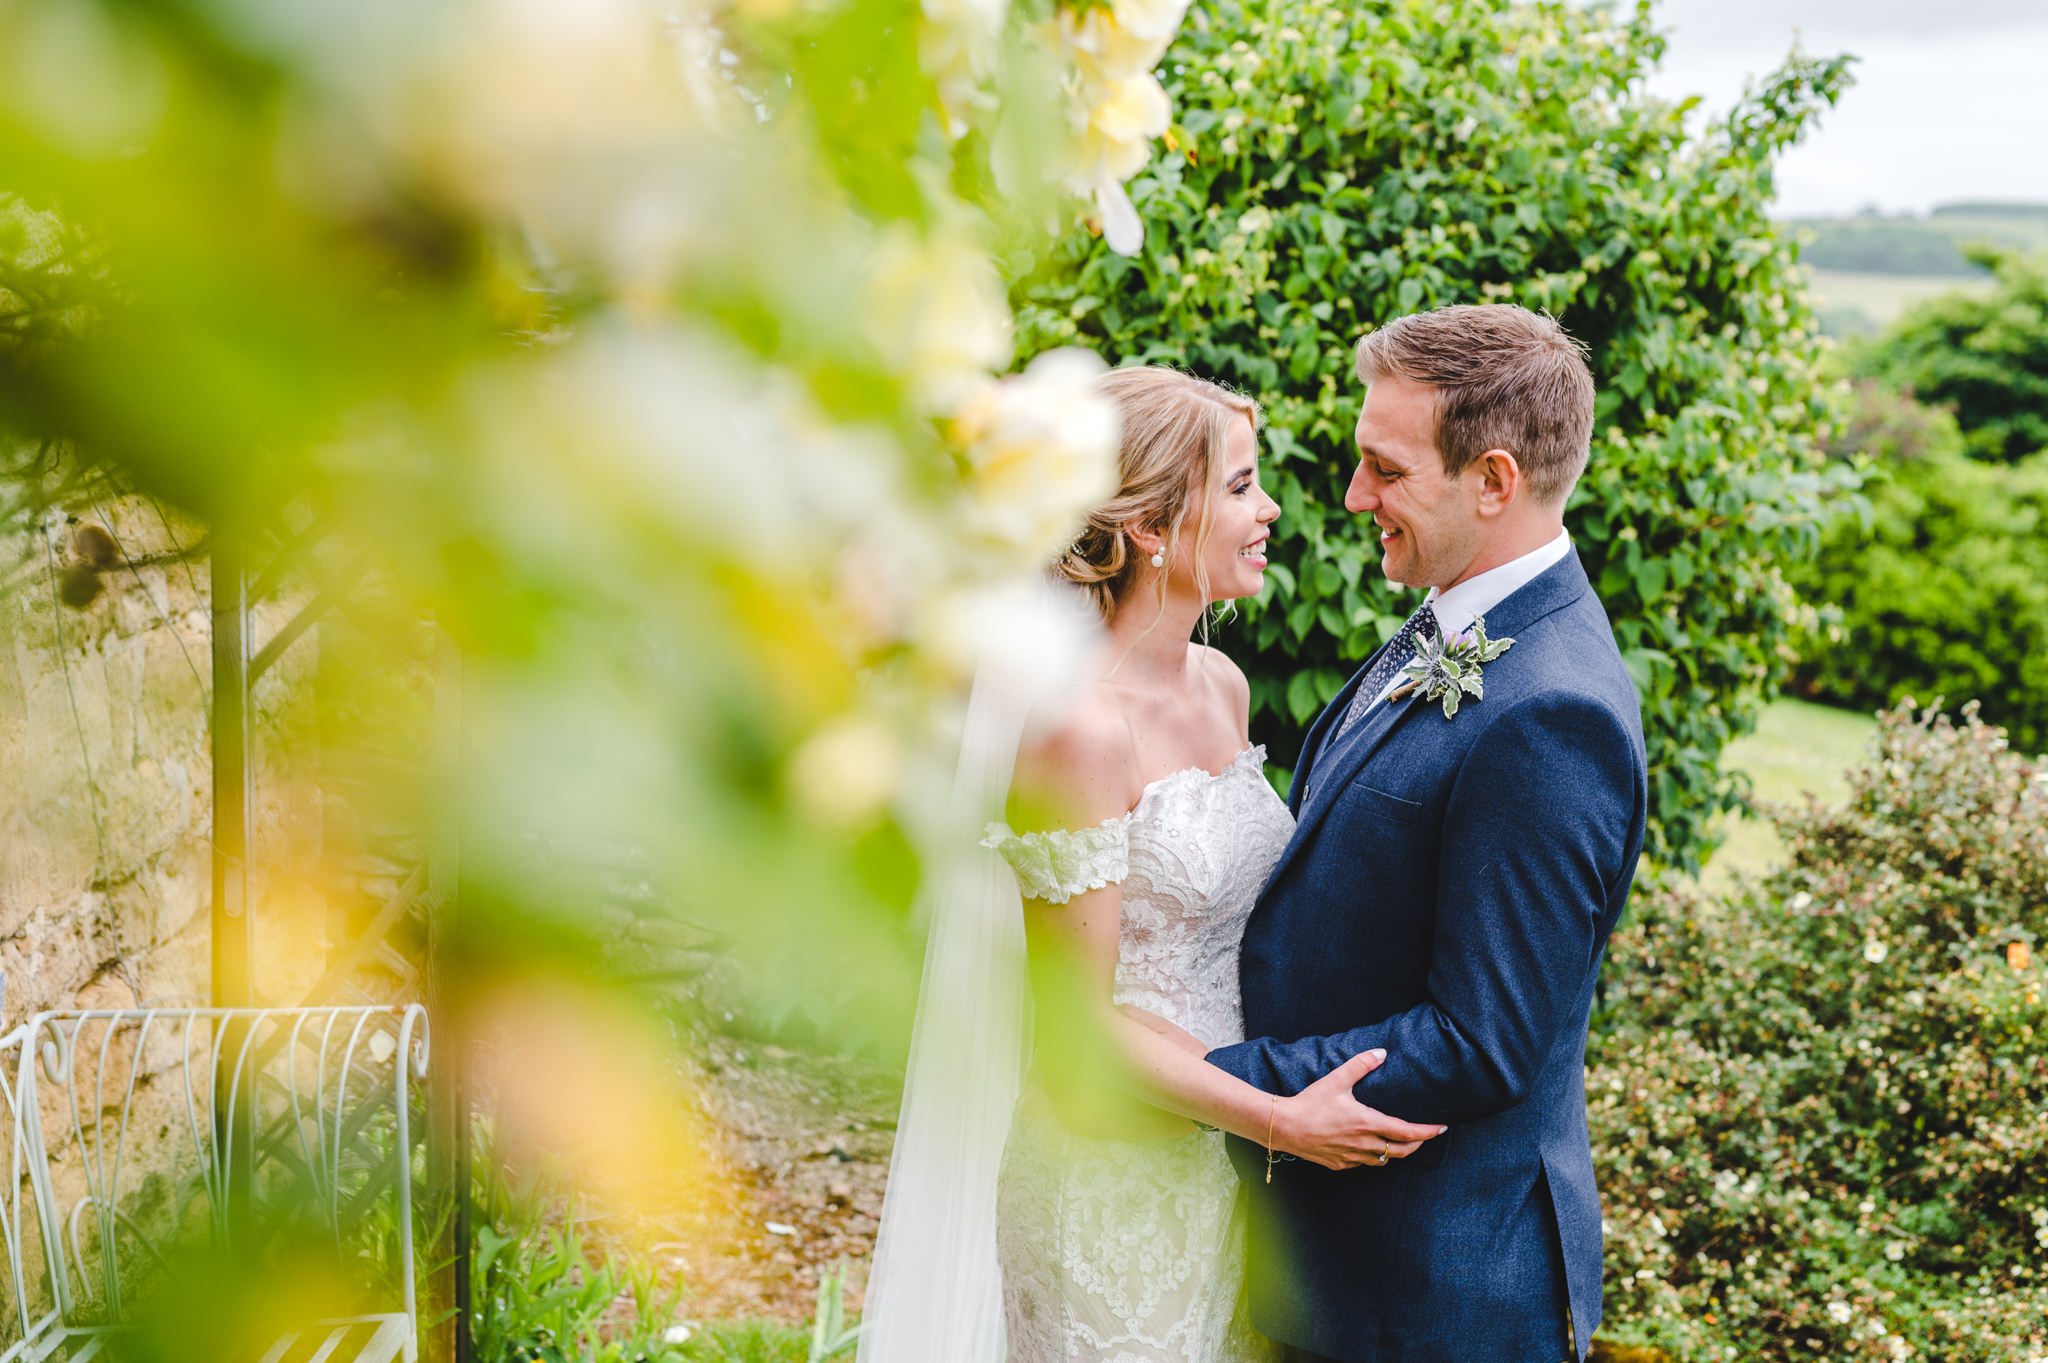 Pictures in the secret garden at Upcote Barn with the Bride and Groom by Bigeye Photography